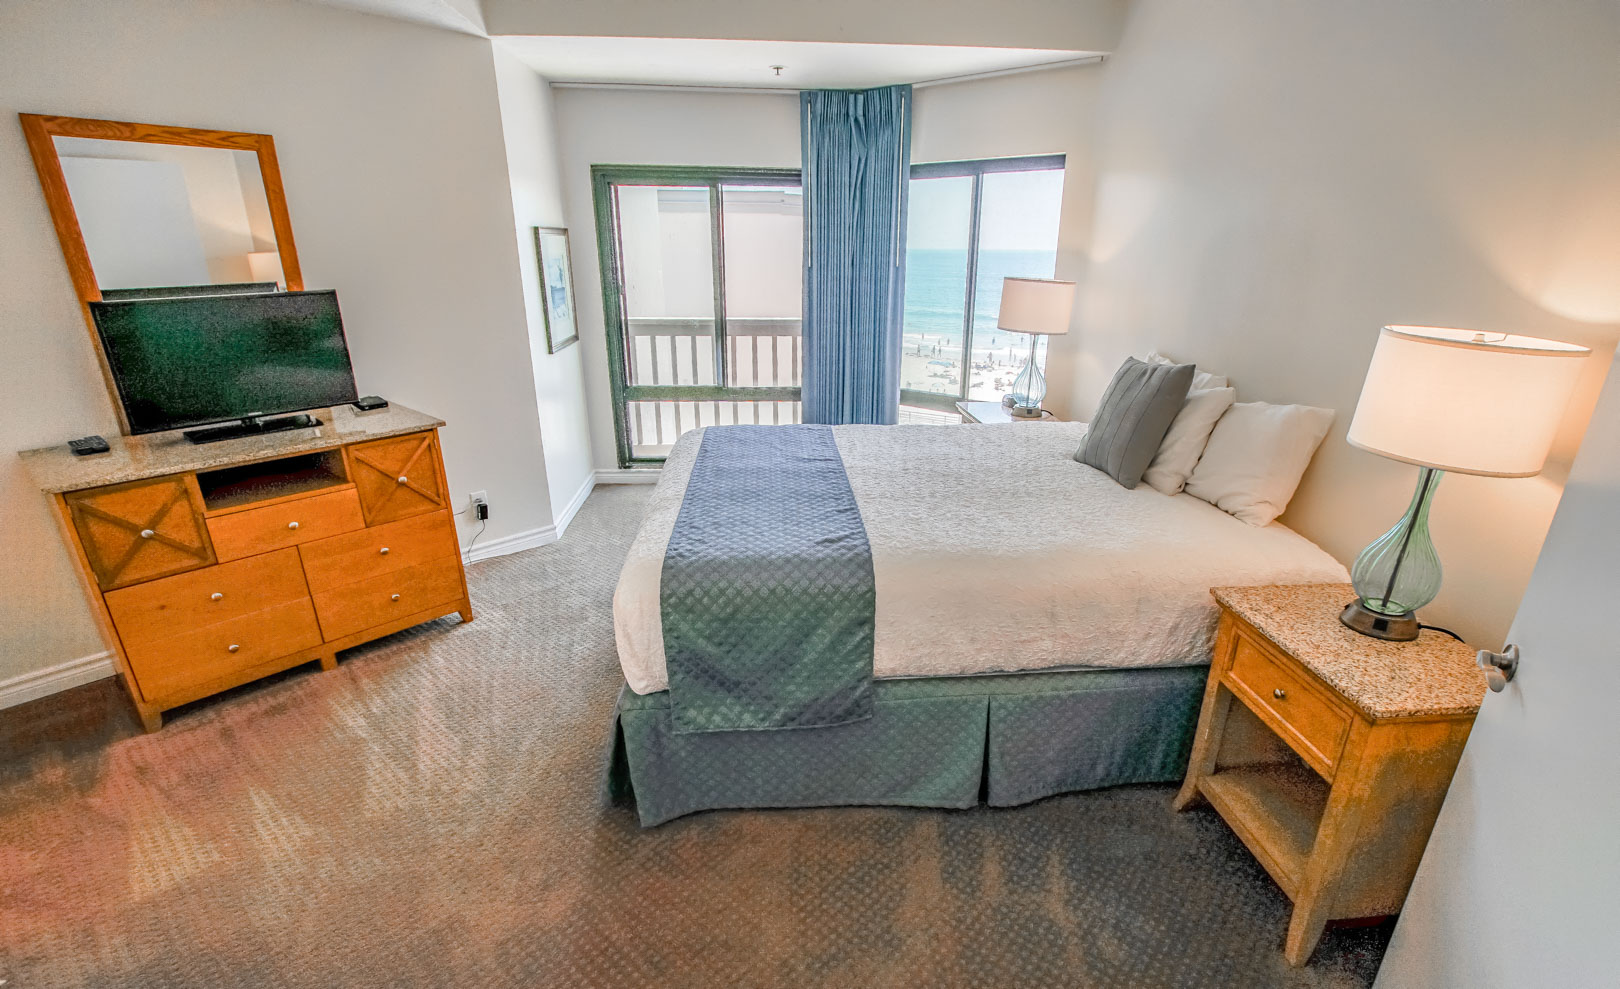 An airy master bedroom with a view overlooking the beach at VRI's See the Sea in San Diego, CA.